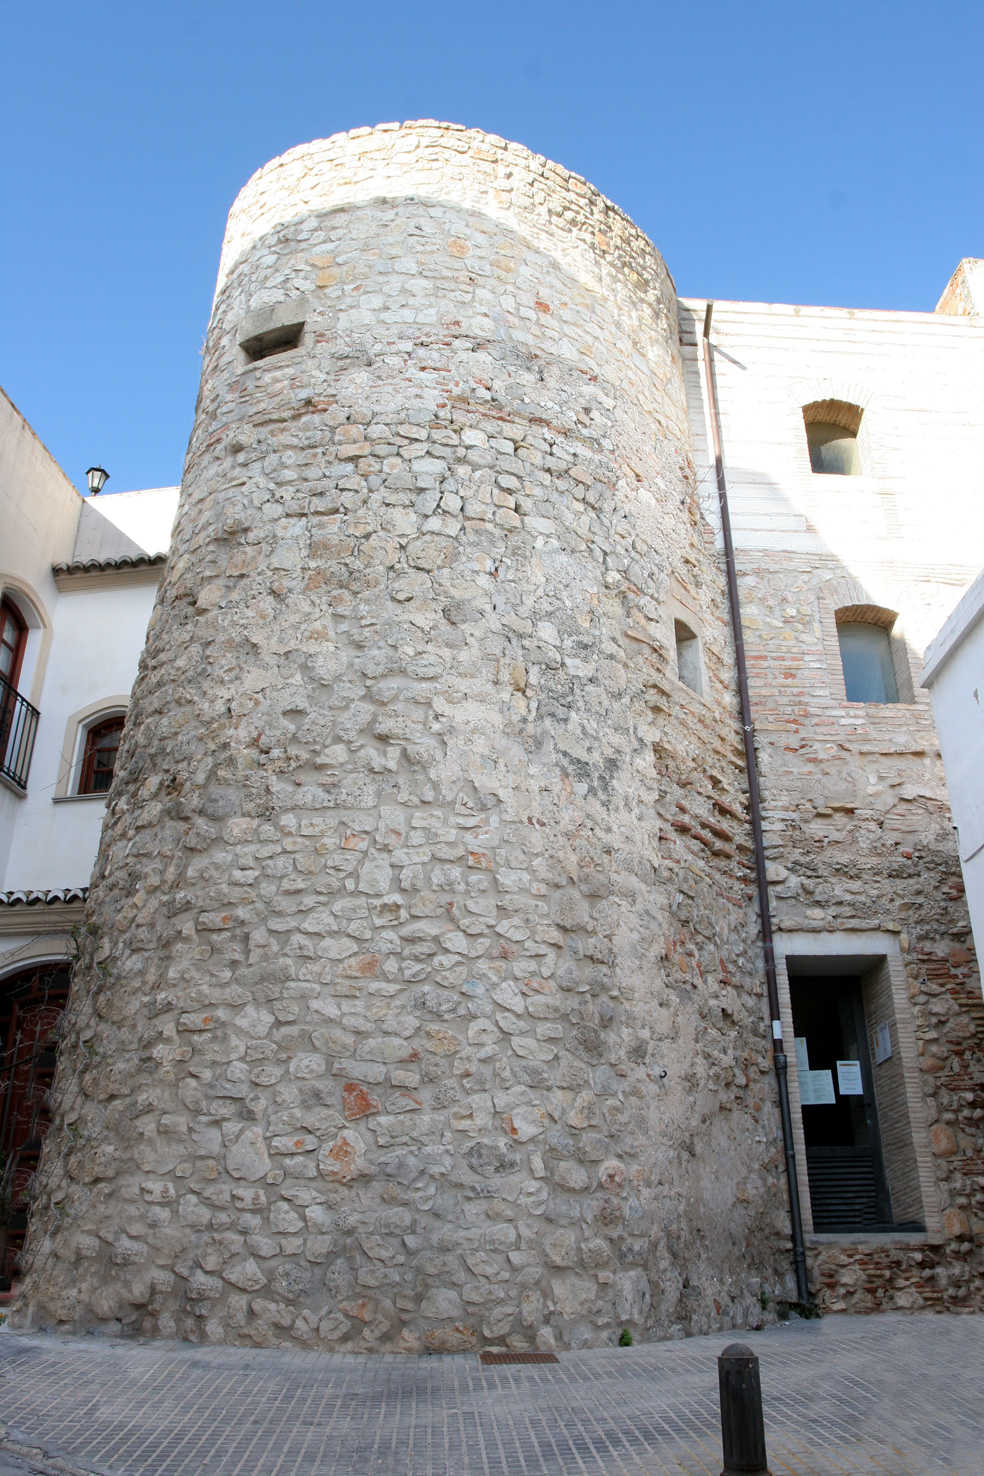 TOWER-MUSEUM OF THE PALACE OF THE COUNTS OF OLIVA (16TH CENTURY)